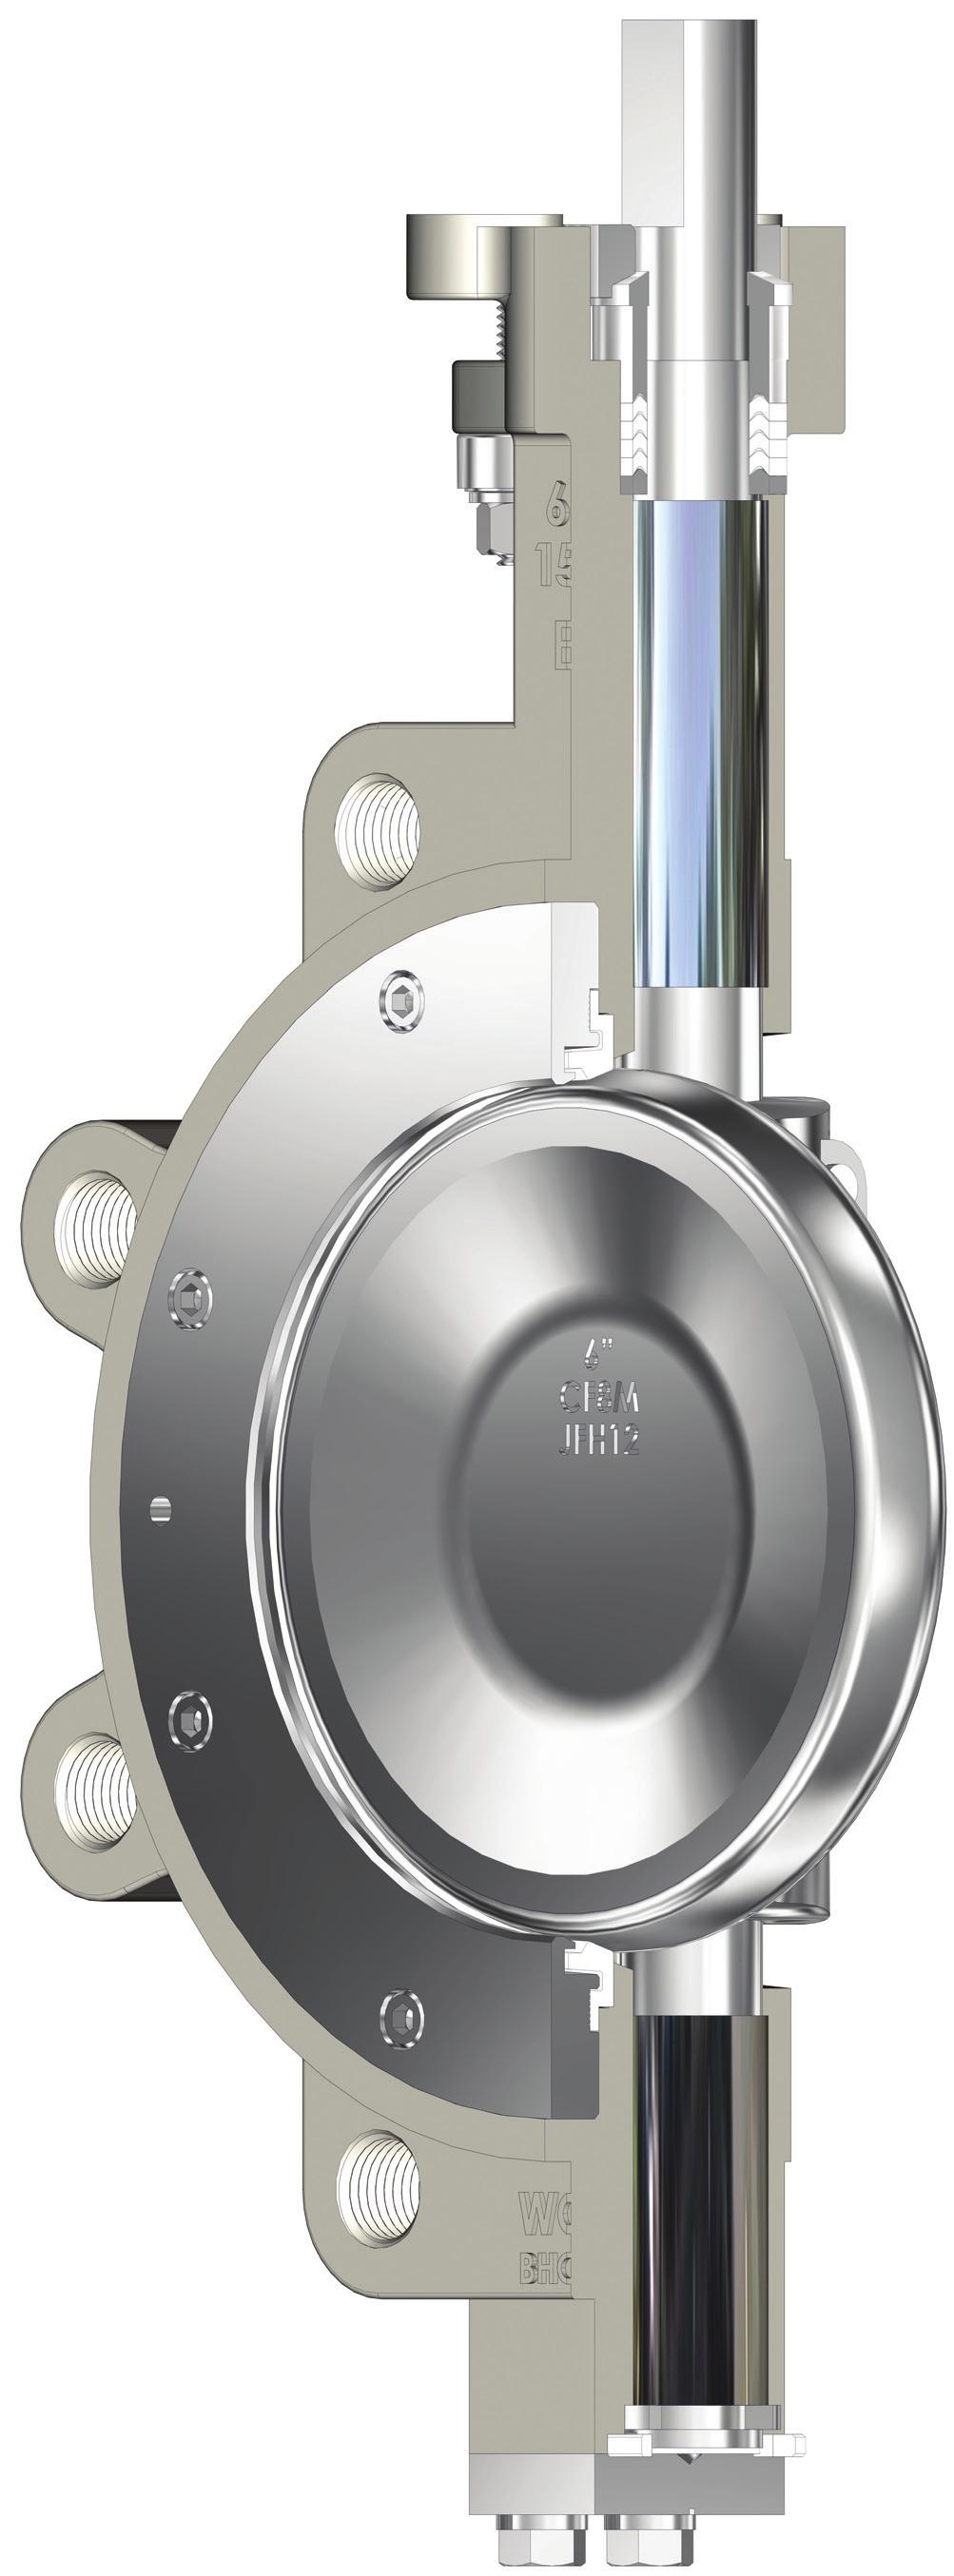 DOUBLE OFFSET HIGH PERFORMANCE BUTTERFLY VALVES ADVANTAGES ISO 5211 MOUNTING FLANGE Universal mounting dimensions simplify valve actuation. Allows for direct mounting of several actuators.